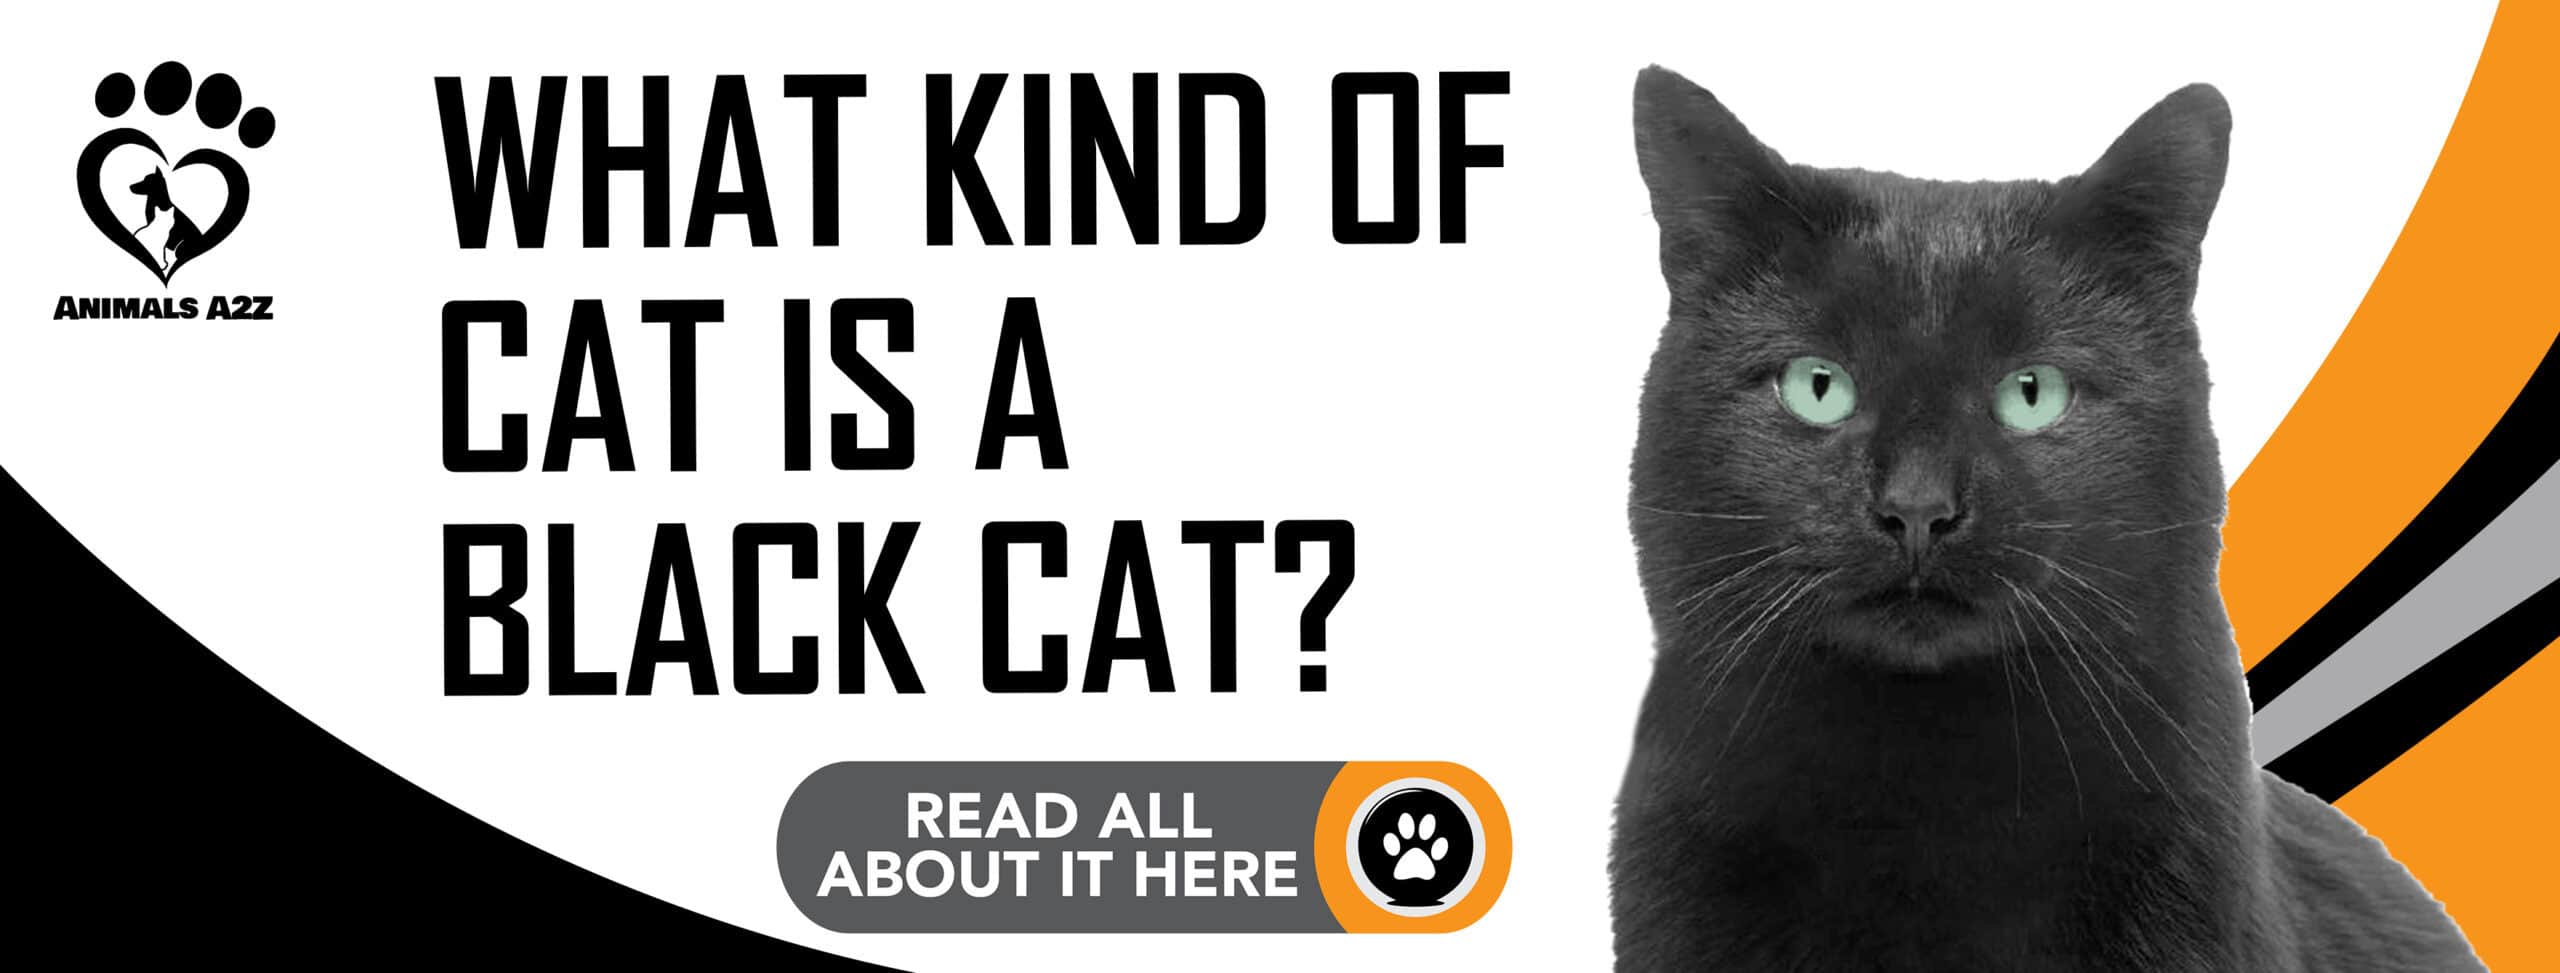 What kind of cat is a black cat